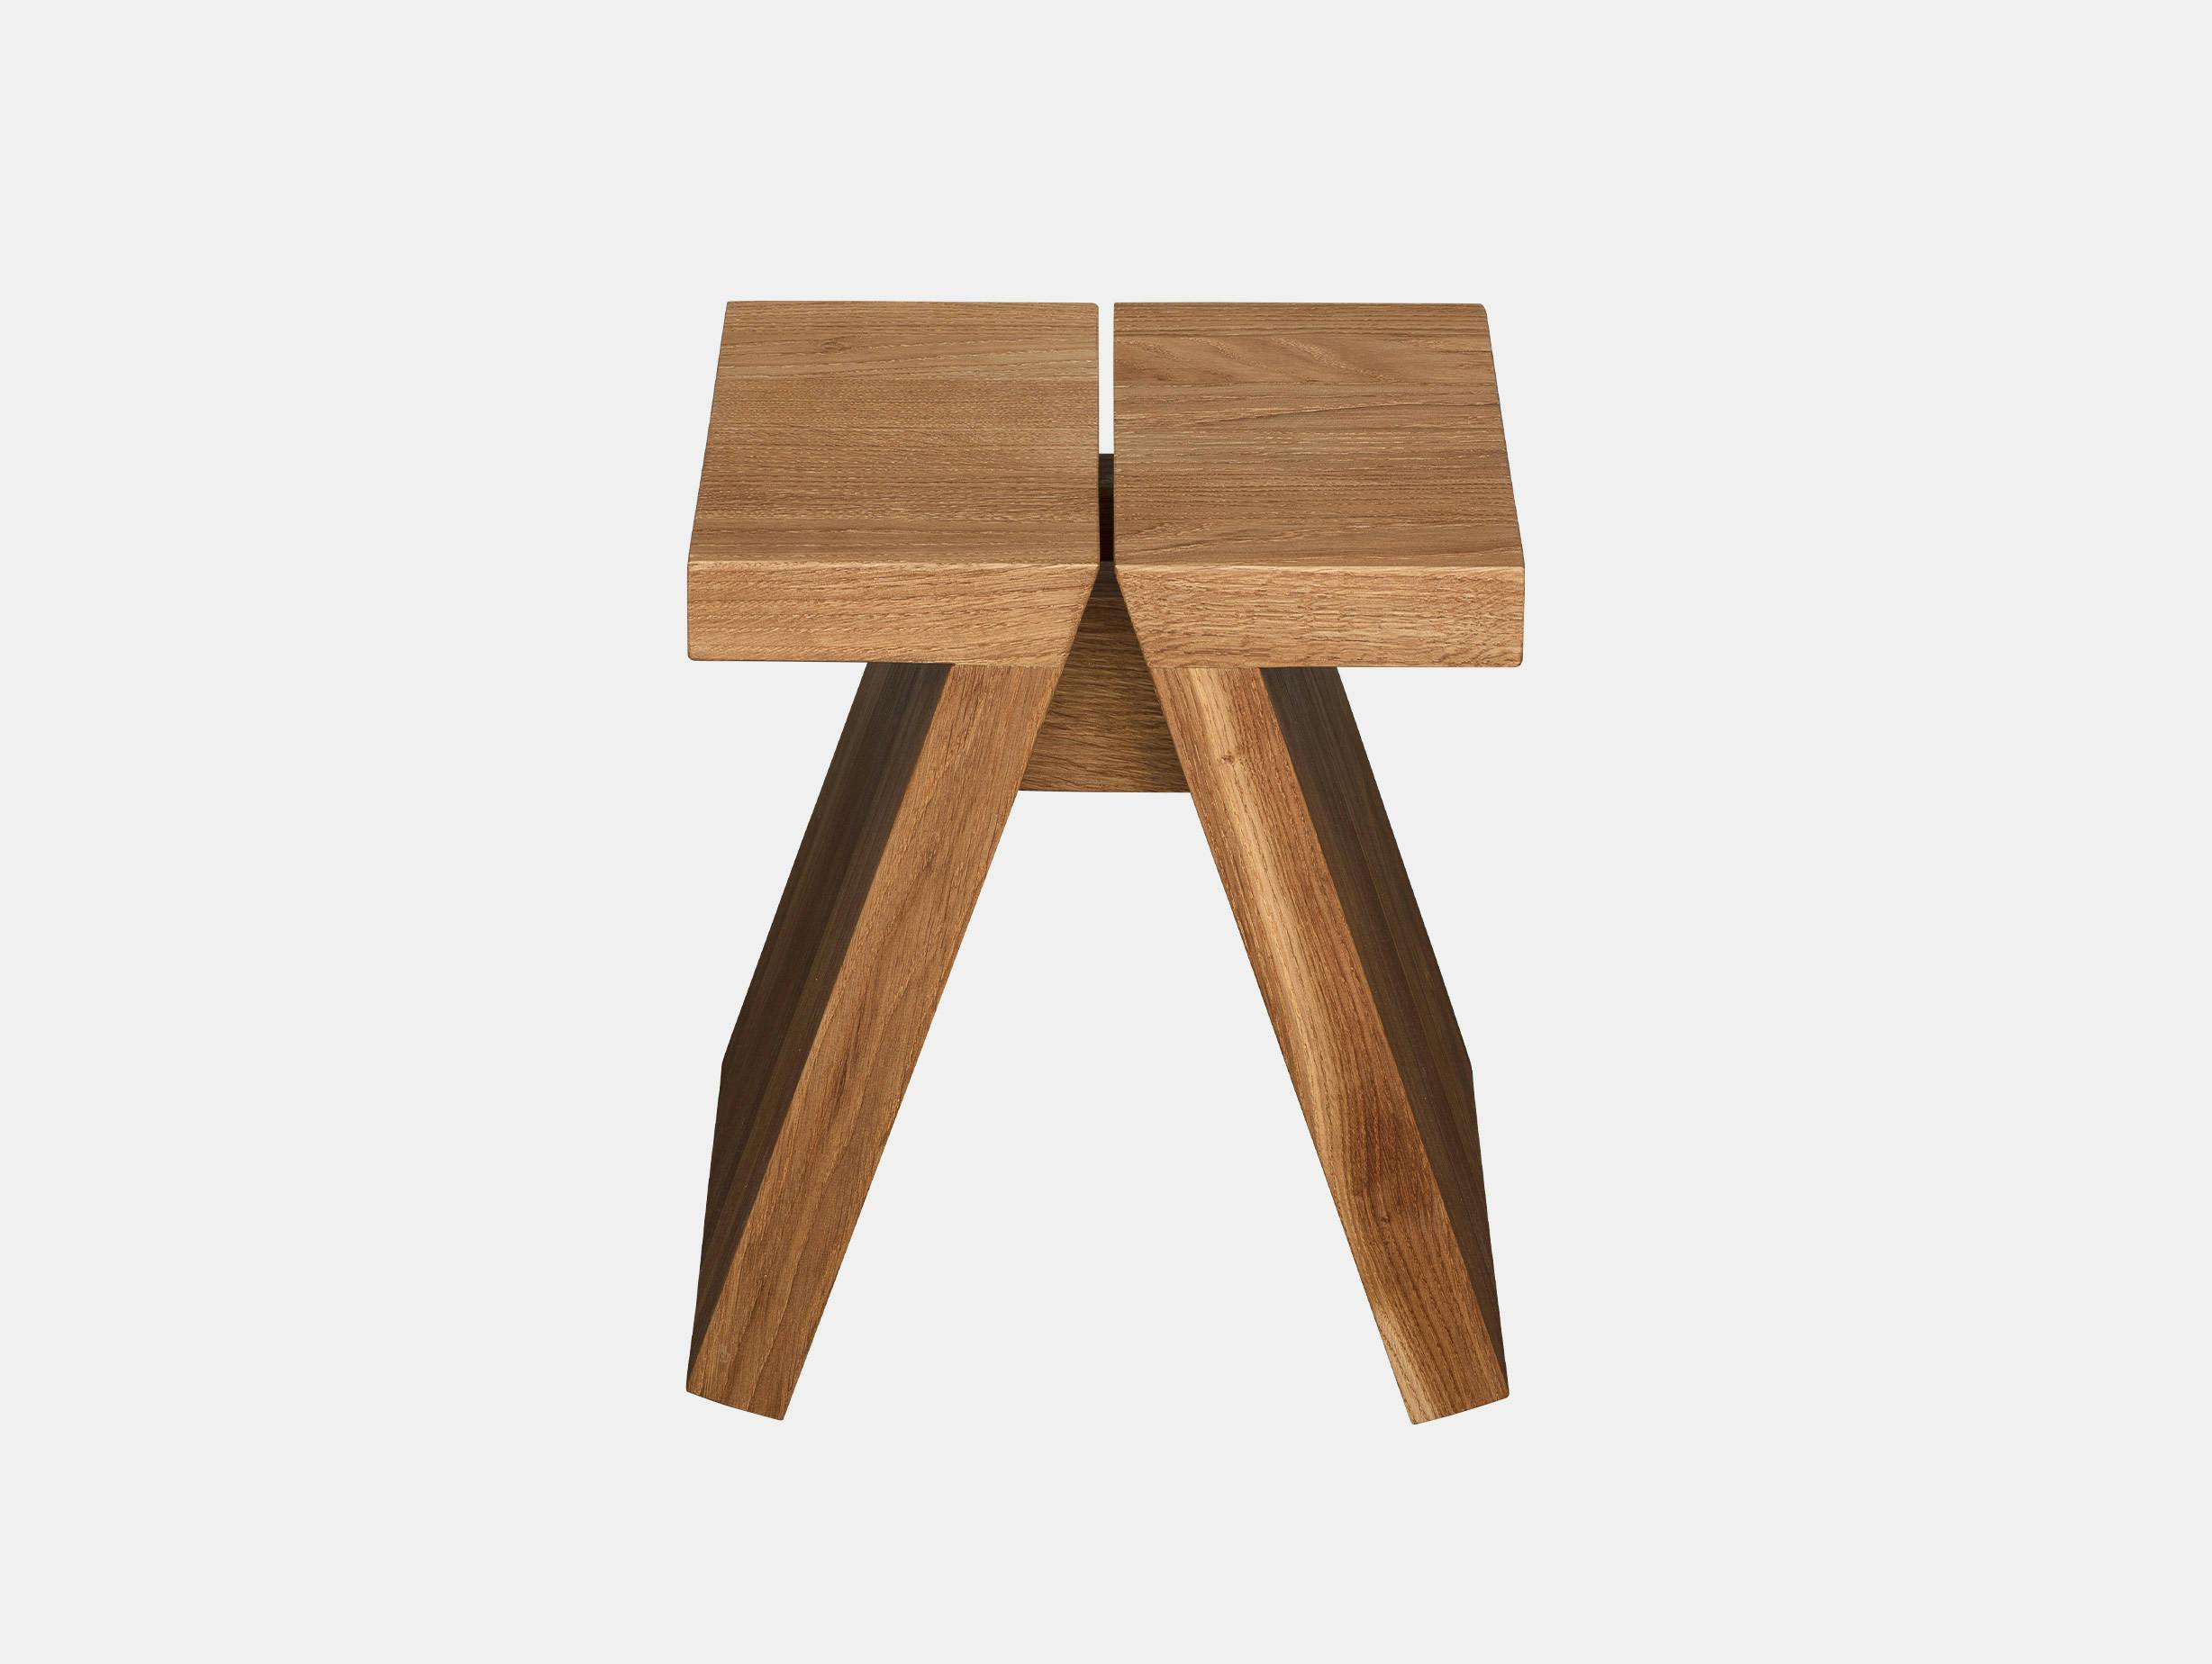 Fogia supersolid object 1 oak stool 3